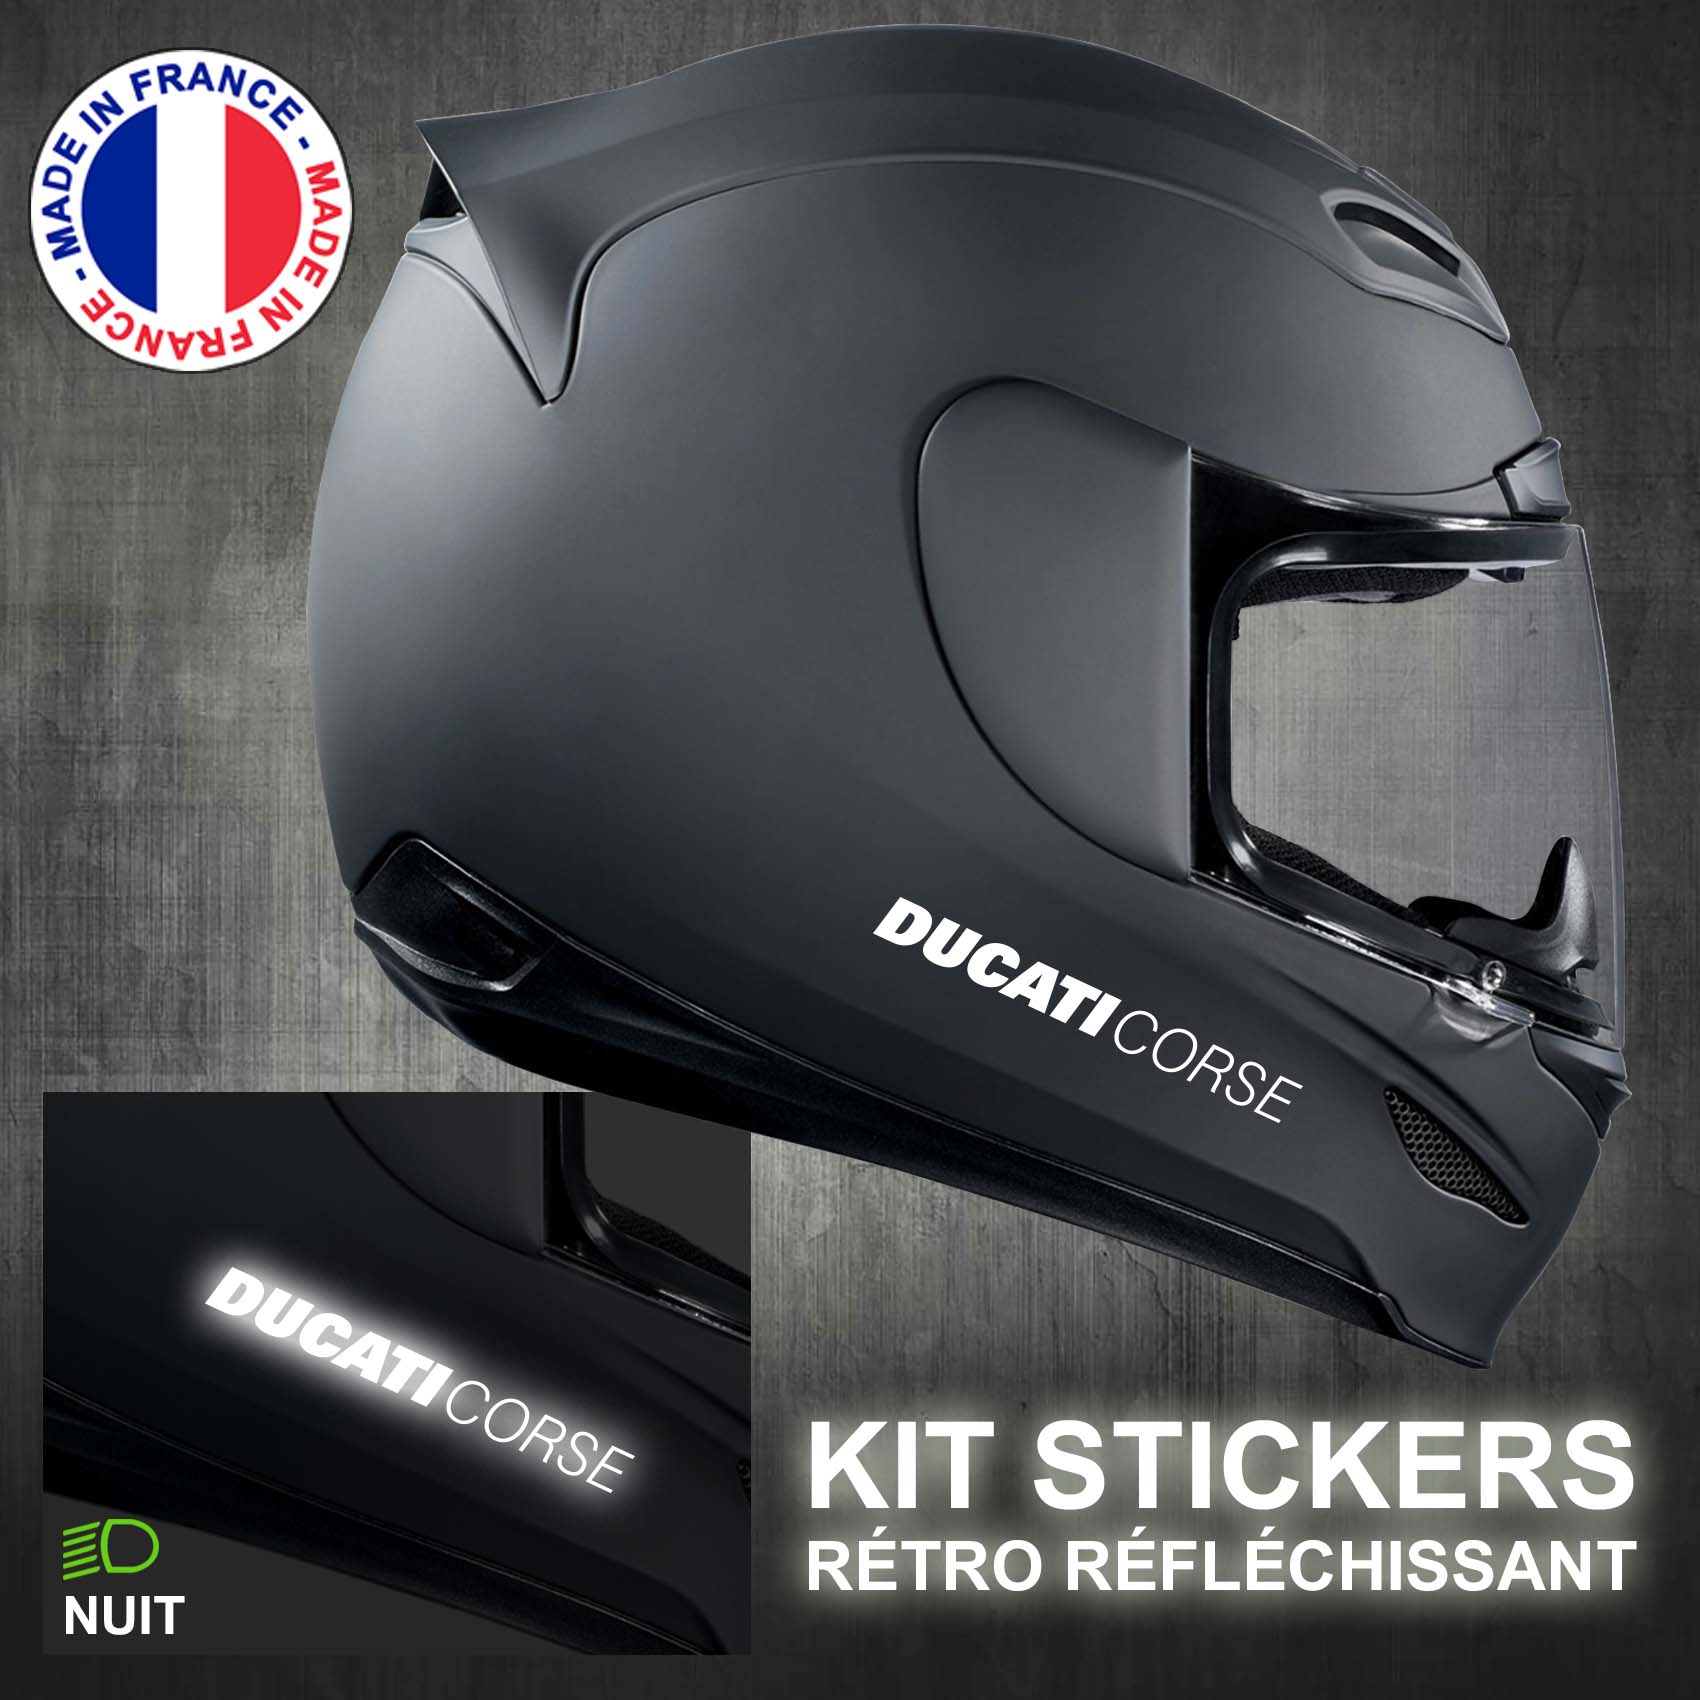 stickers-casque-moto-ducati-corse-ref4-retro-reflechissant-noir-autocollant-moto-velo-tuning-racing-route-sticker-casques-adhesif-scooter-nuit-securite-decals-personnalise-personnalisable-min